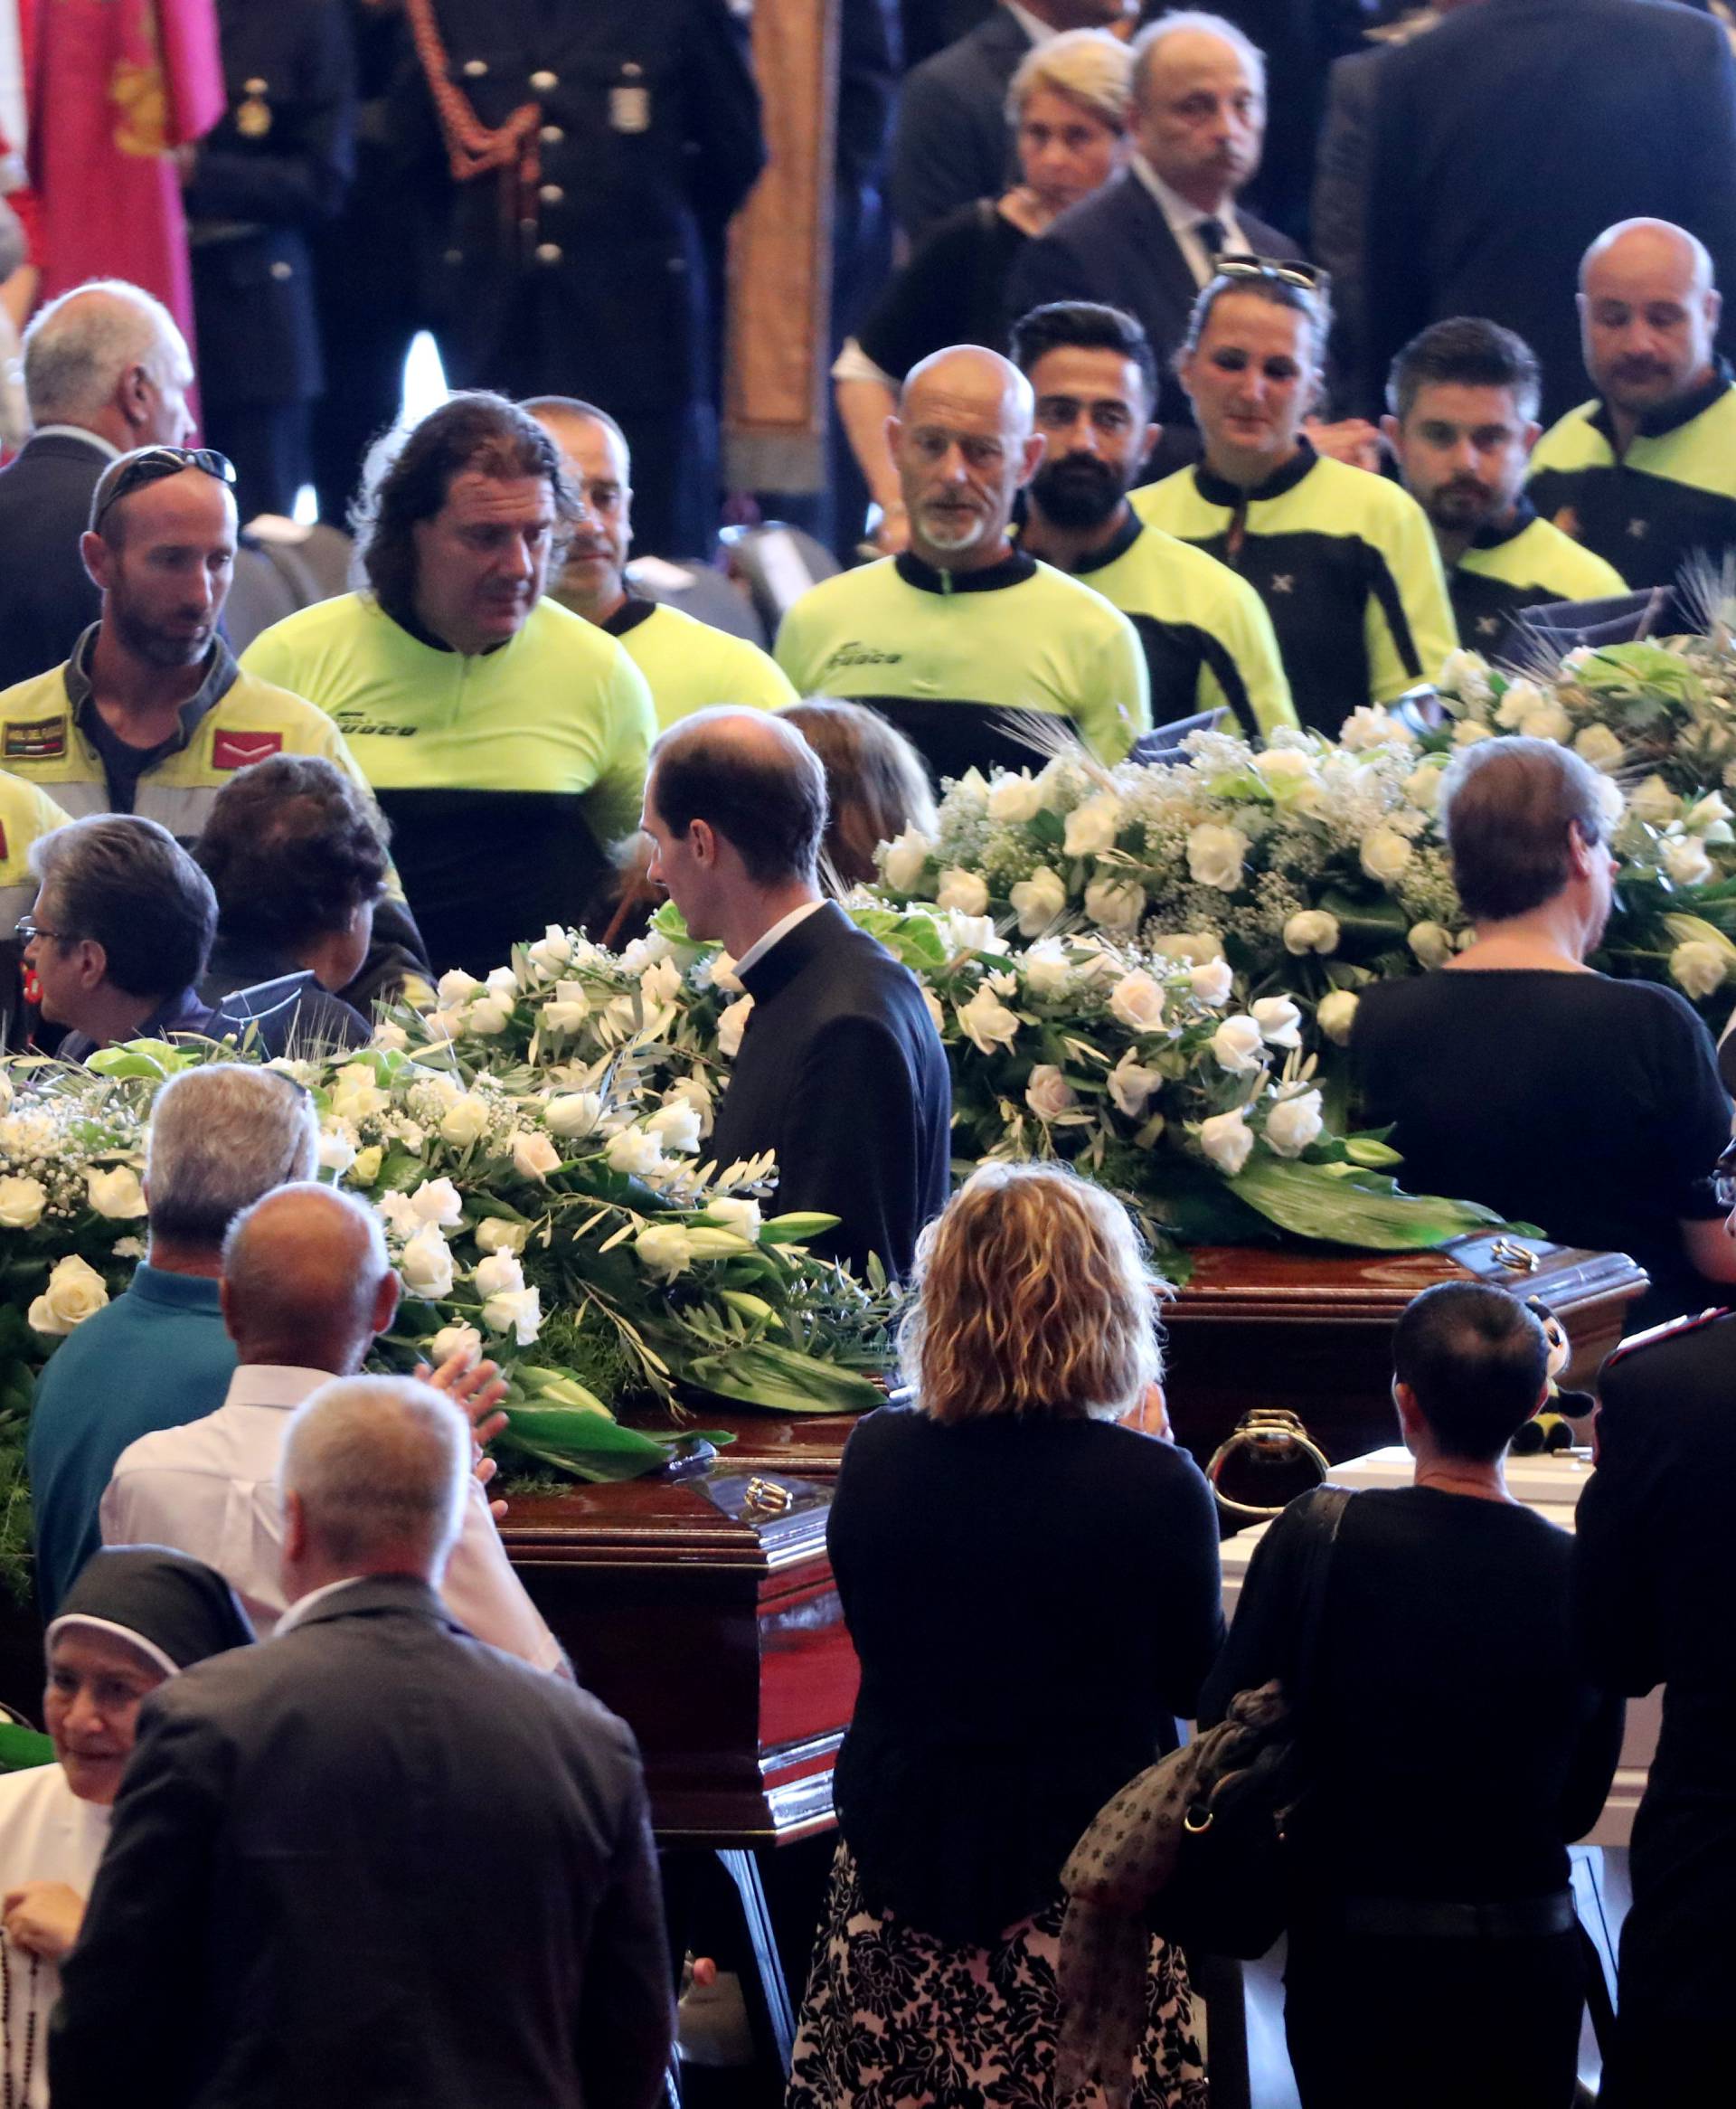 Firefighters arrive to pay their respects to the victims of the Morandi Bridge collapse, before the state funeral at the Genoa Trade Fair and Exhibition Centre in Genoa